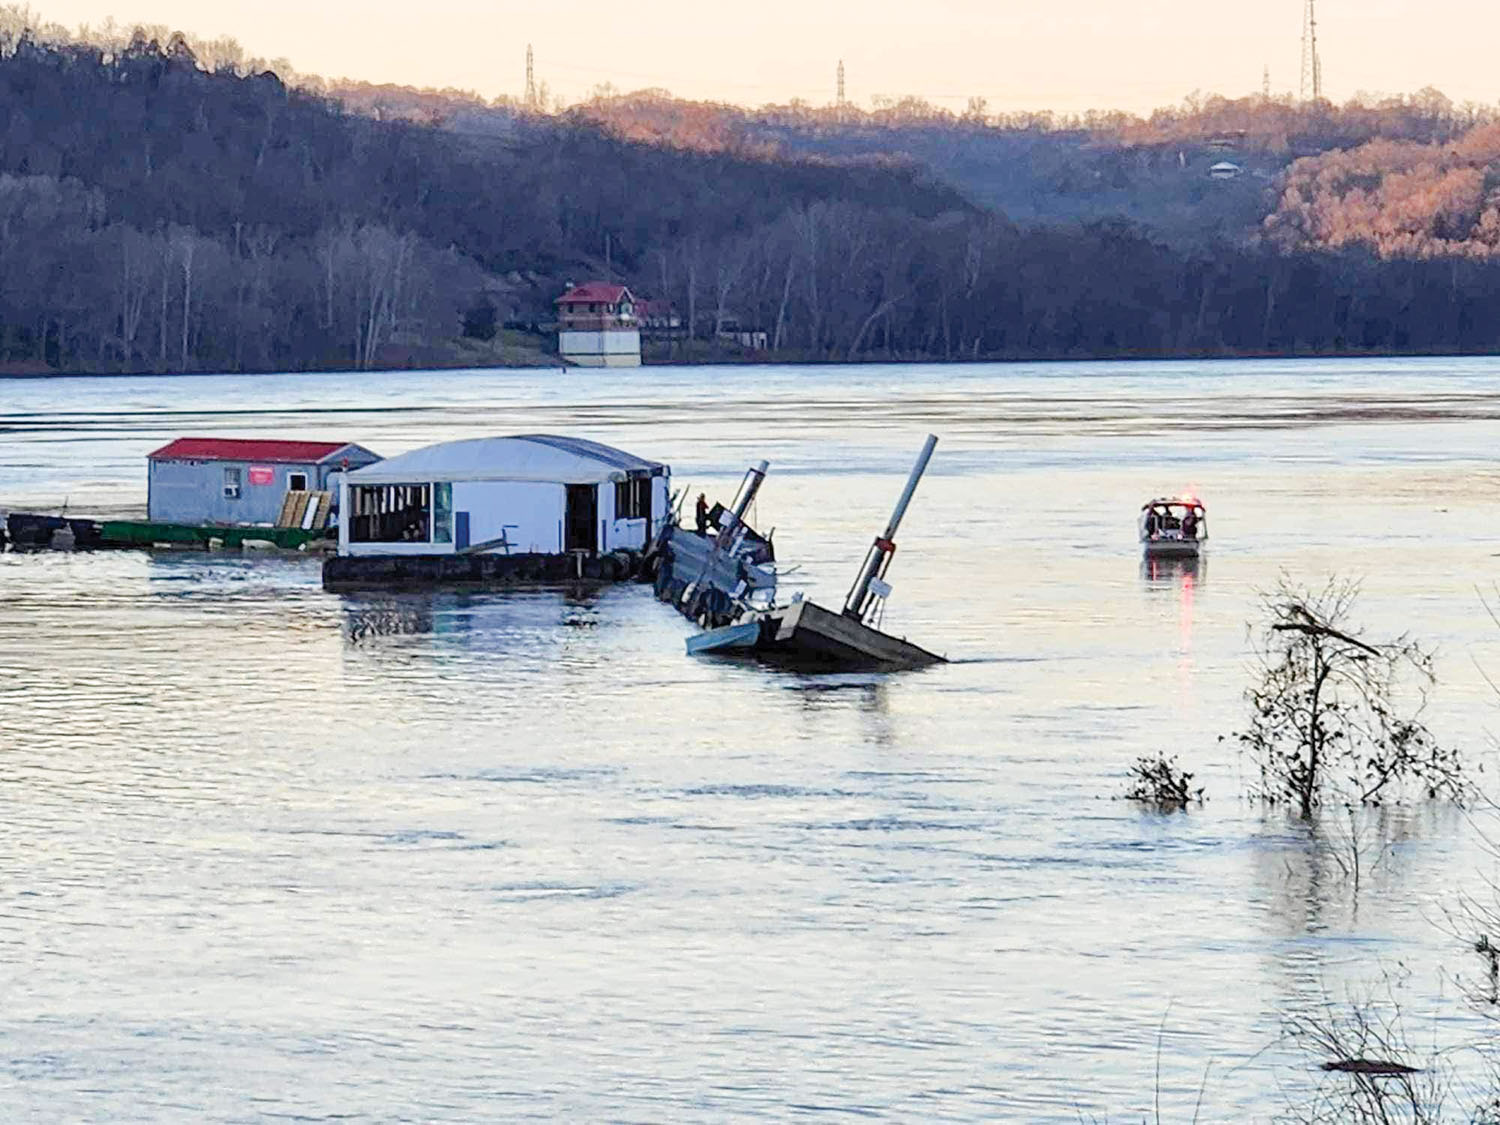 Skipper’s River Cafe and Steamboat Marina floats downstream on the Ohio River February 3. (Photo courtesy of New Richmond Fire & EMS)